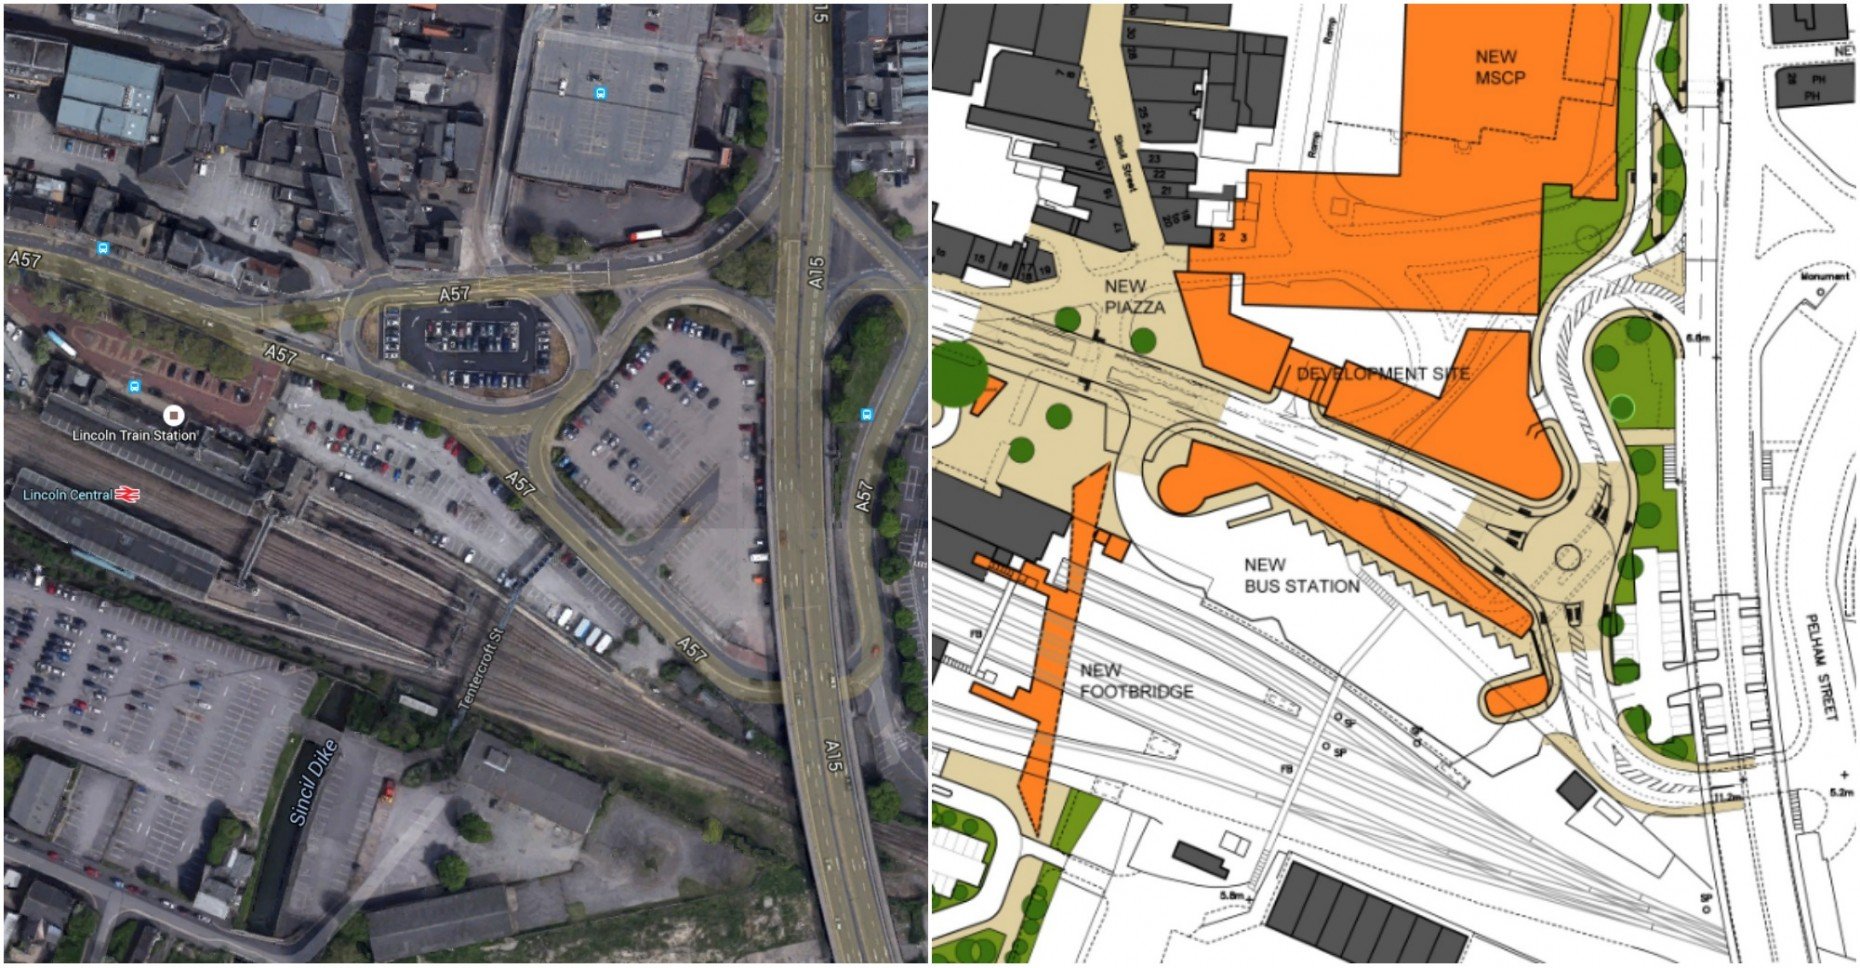 Before and after: The city centre landscape will change to accommodate the new Lincoln Transport Hub.